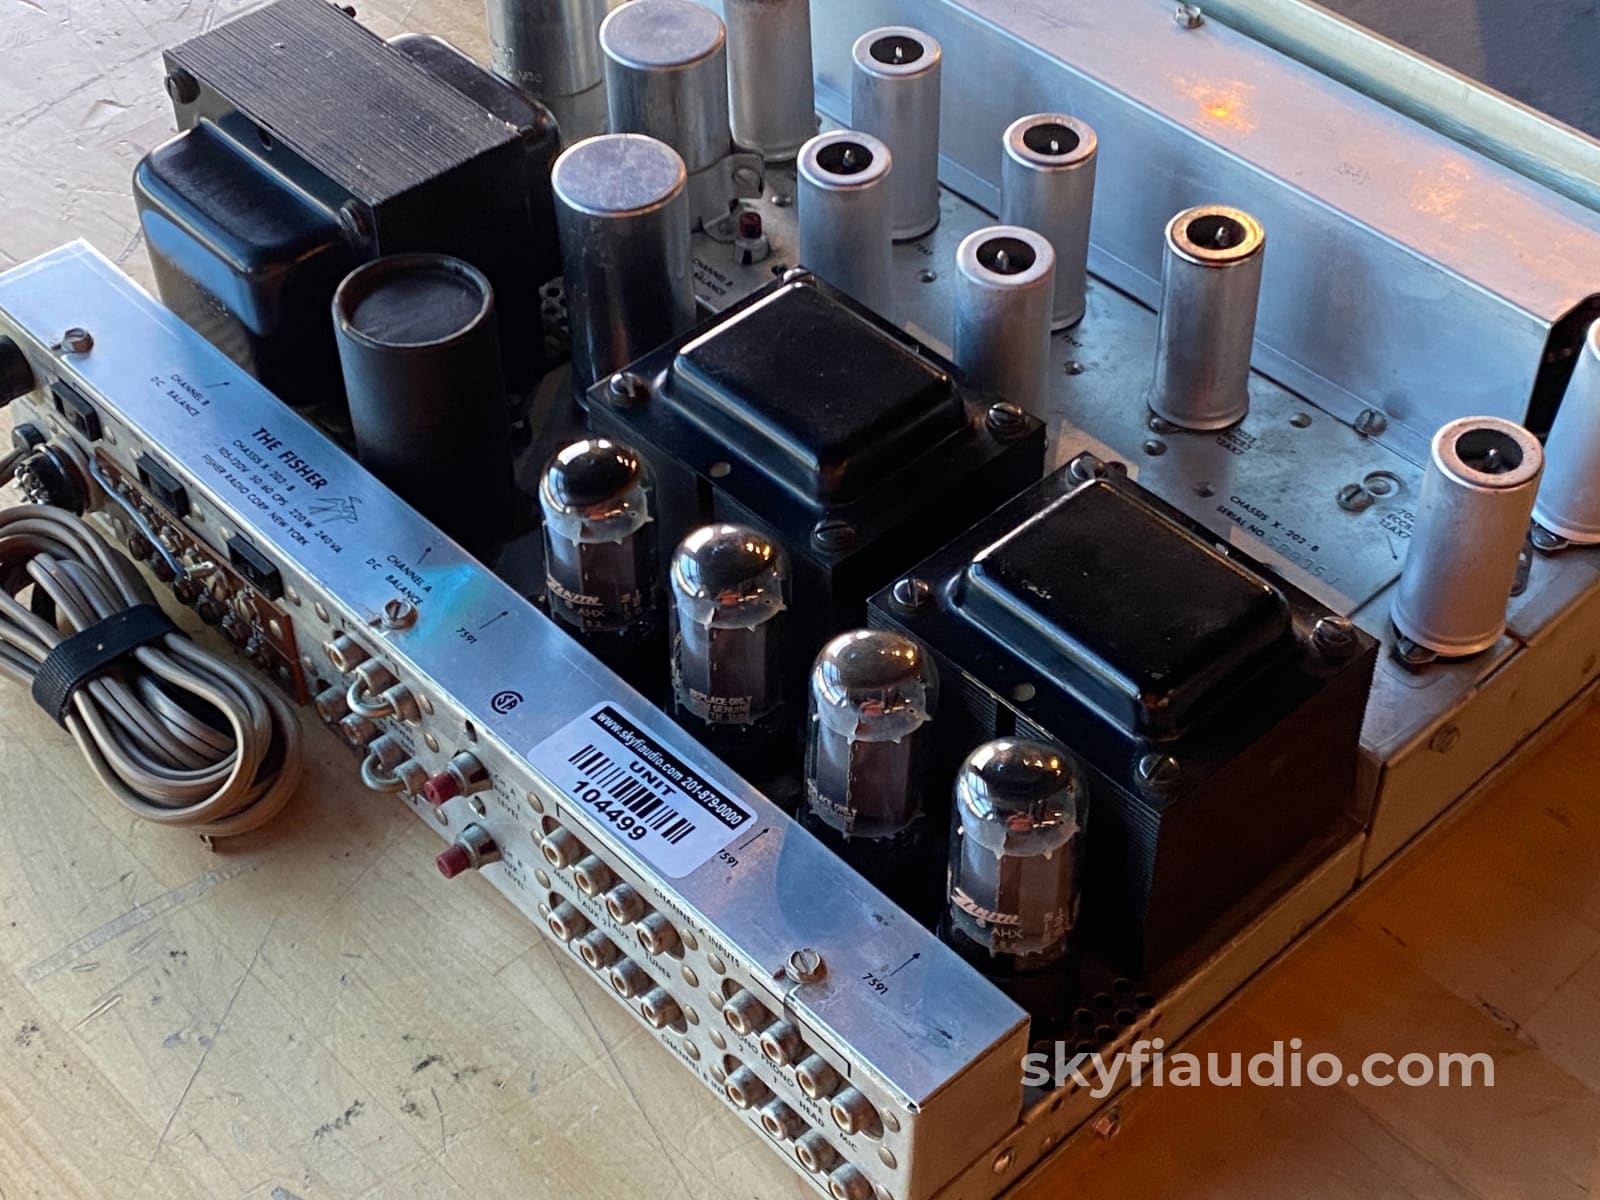 The Fisher X-202B Tube Integrated Amplifier With Case - Super Clean Survivor!